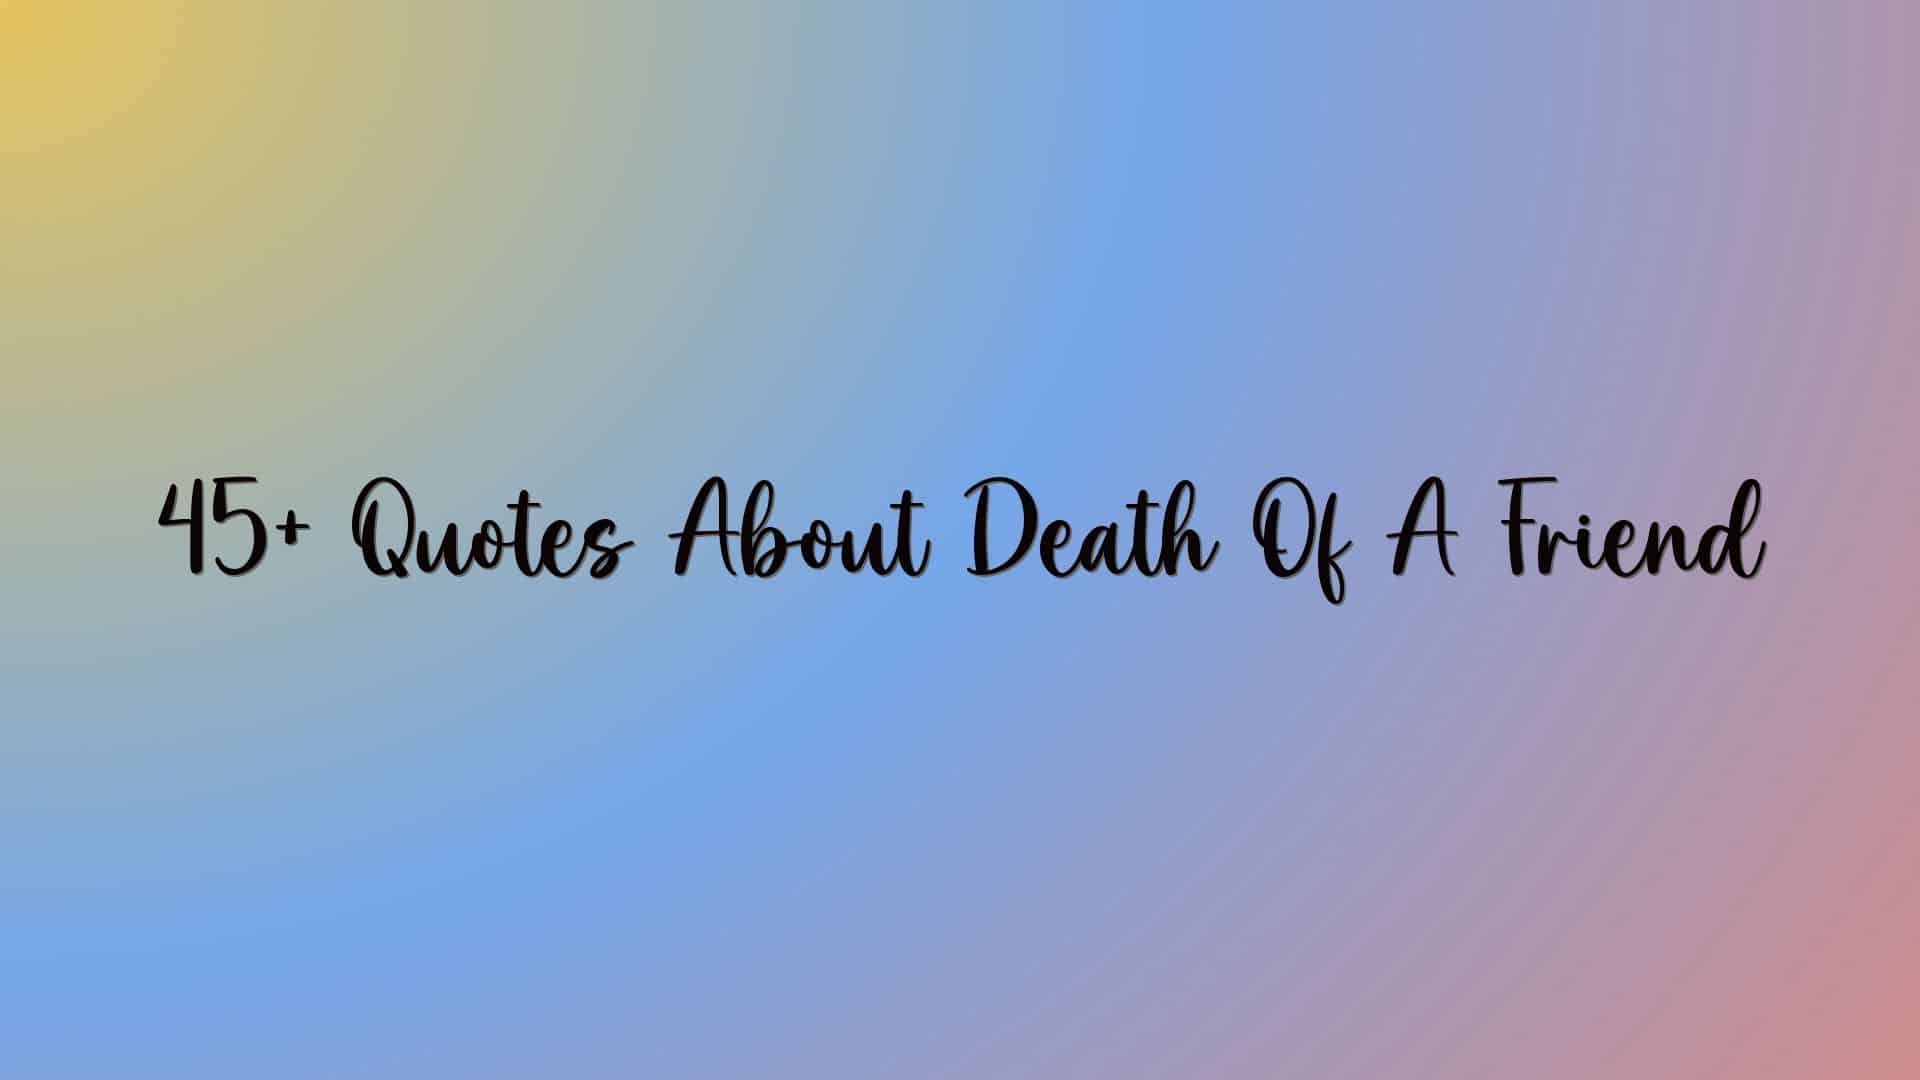 45+ Quotes About Death Of A Friend